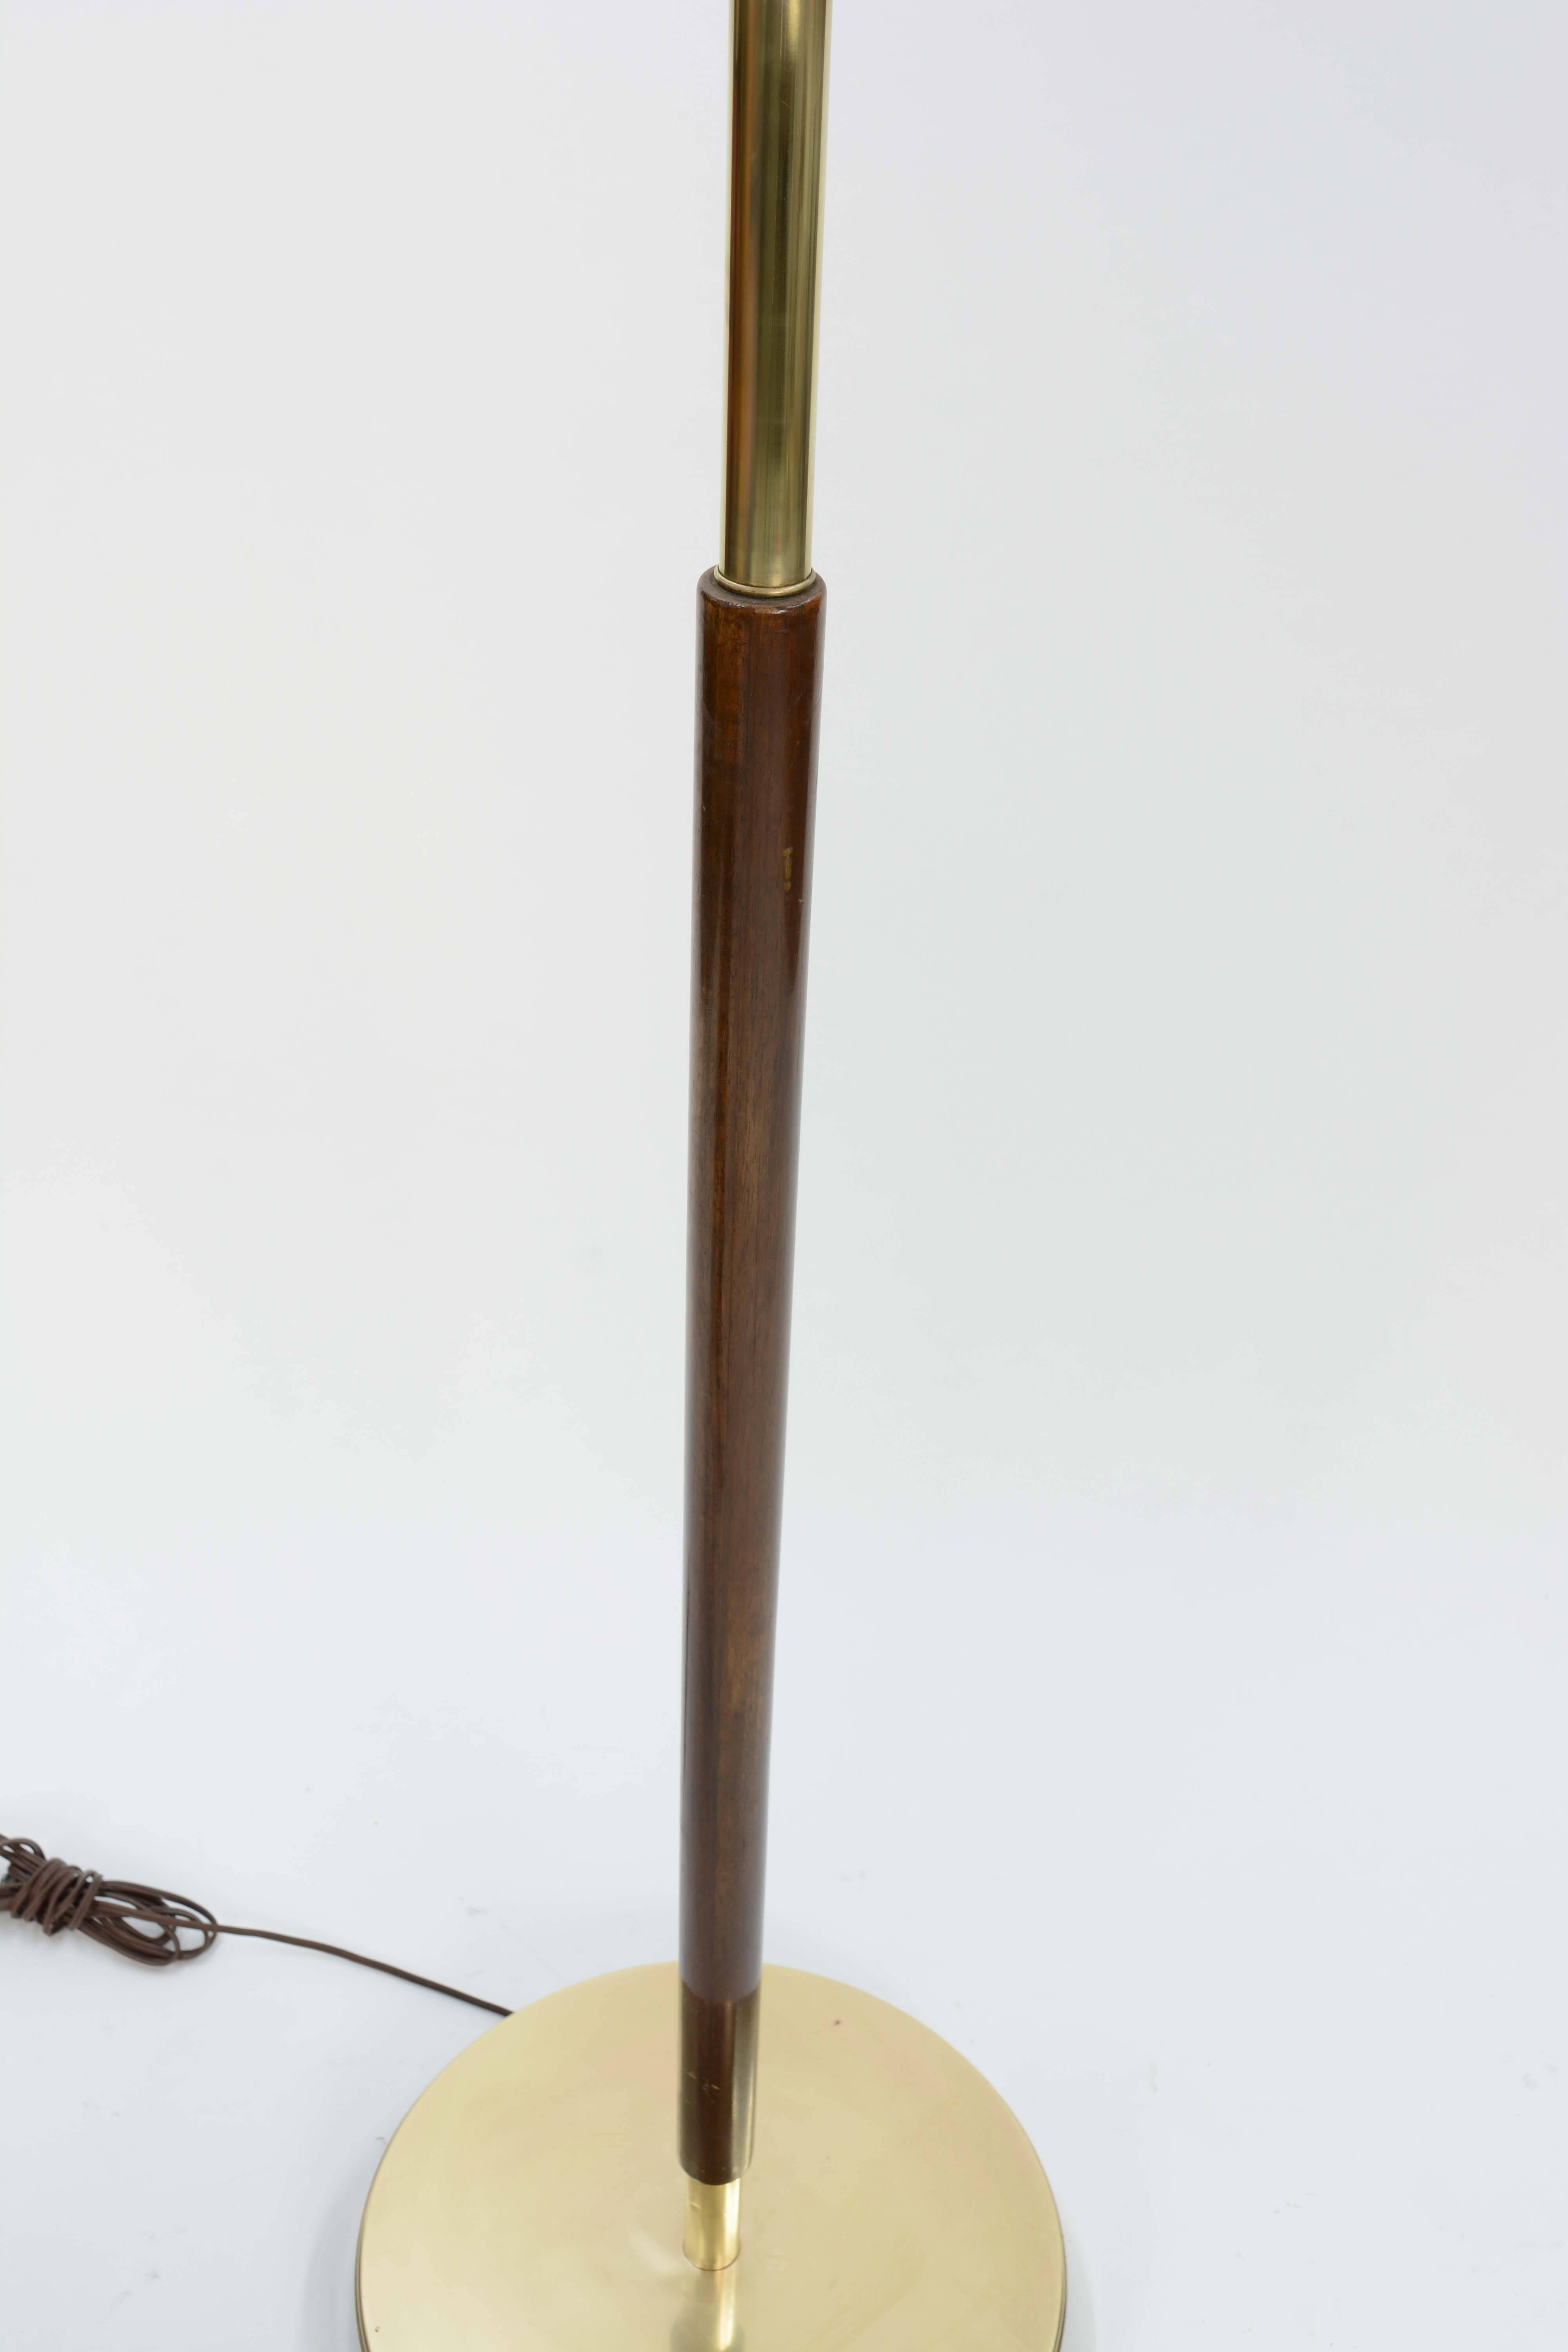 Stunning and Majestic French Modernist Floor Lamp in Brass and Walnut For Sale 1